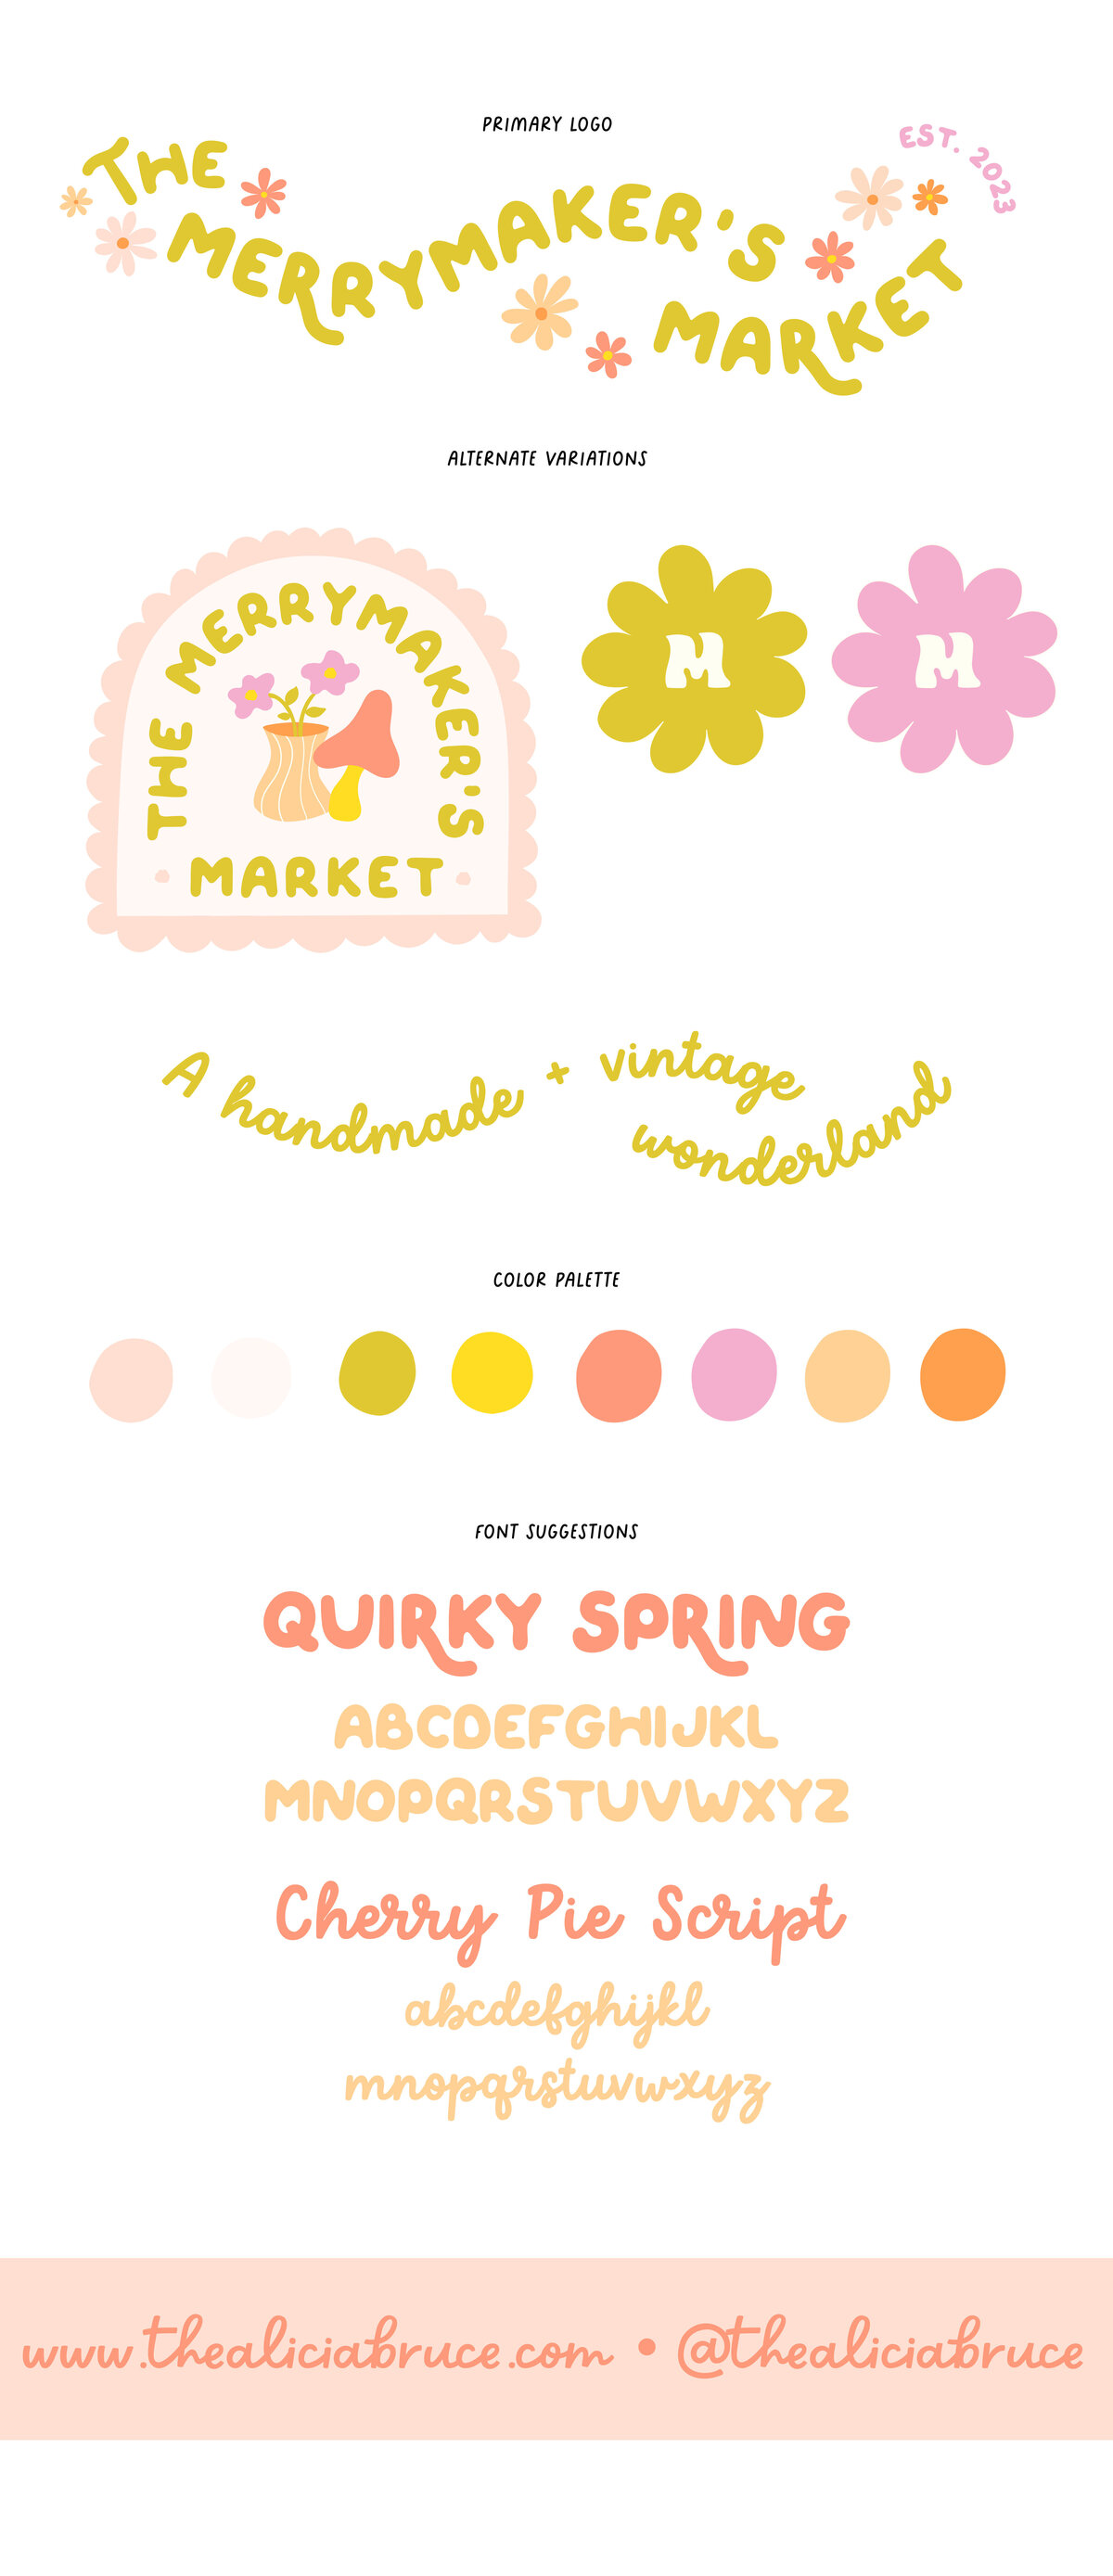 The-Merrymakers-Market-Brand-Identity-01